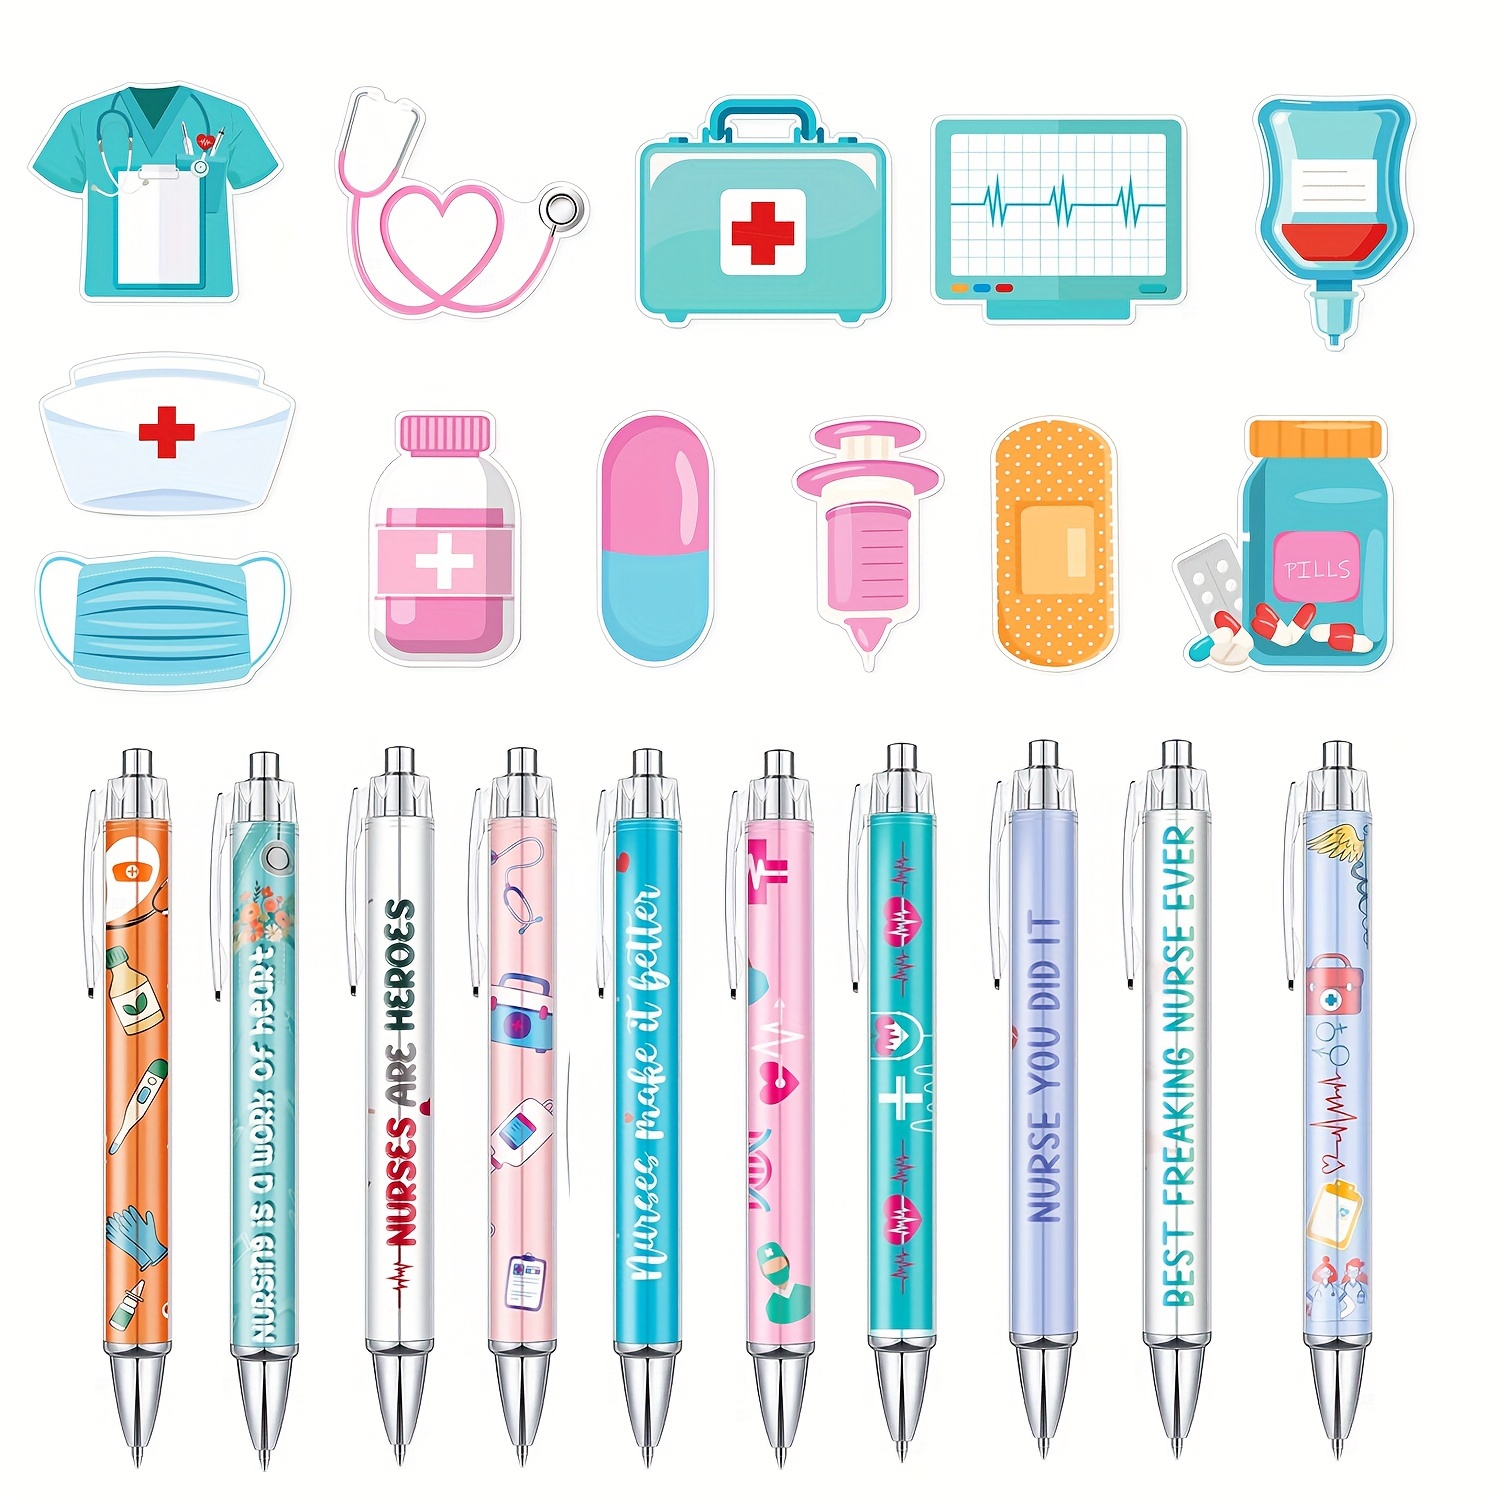 

22-piece Retractable Ballpoint Pen Set For Nurses And Medical Professionals, Medium Point, Durable Plastic, Ideal Gift For Doctors, Nurses, Medical & Nursing Students - Assorted Healthcare Designs